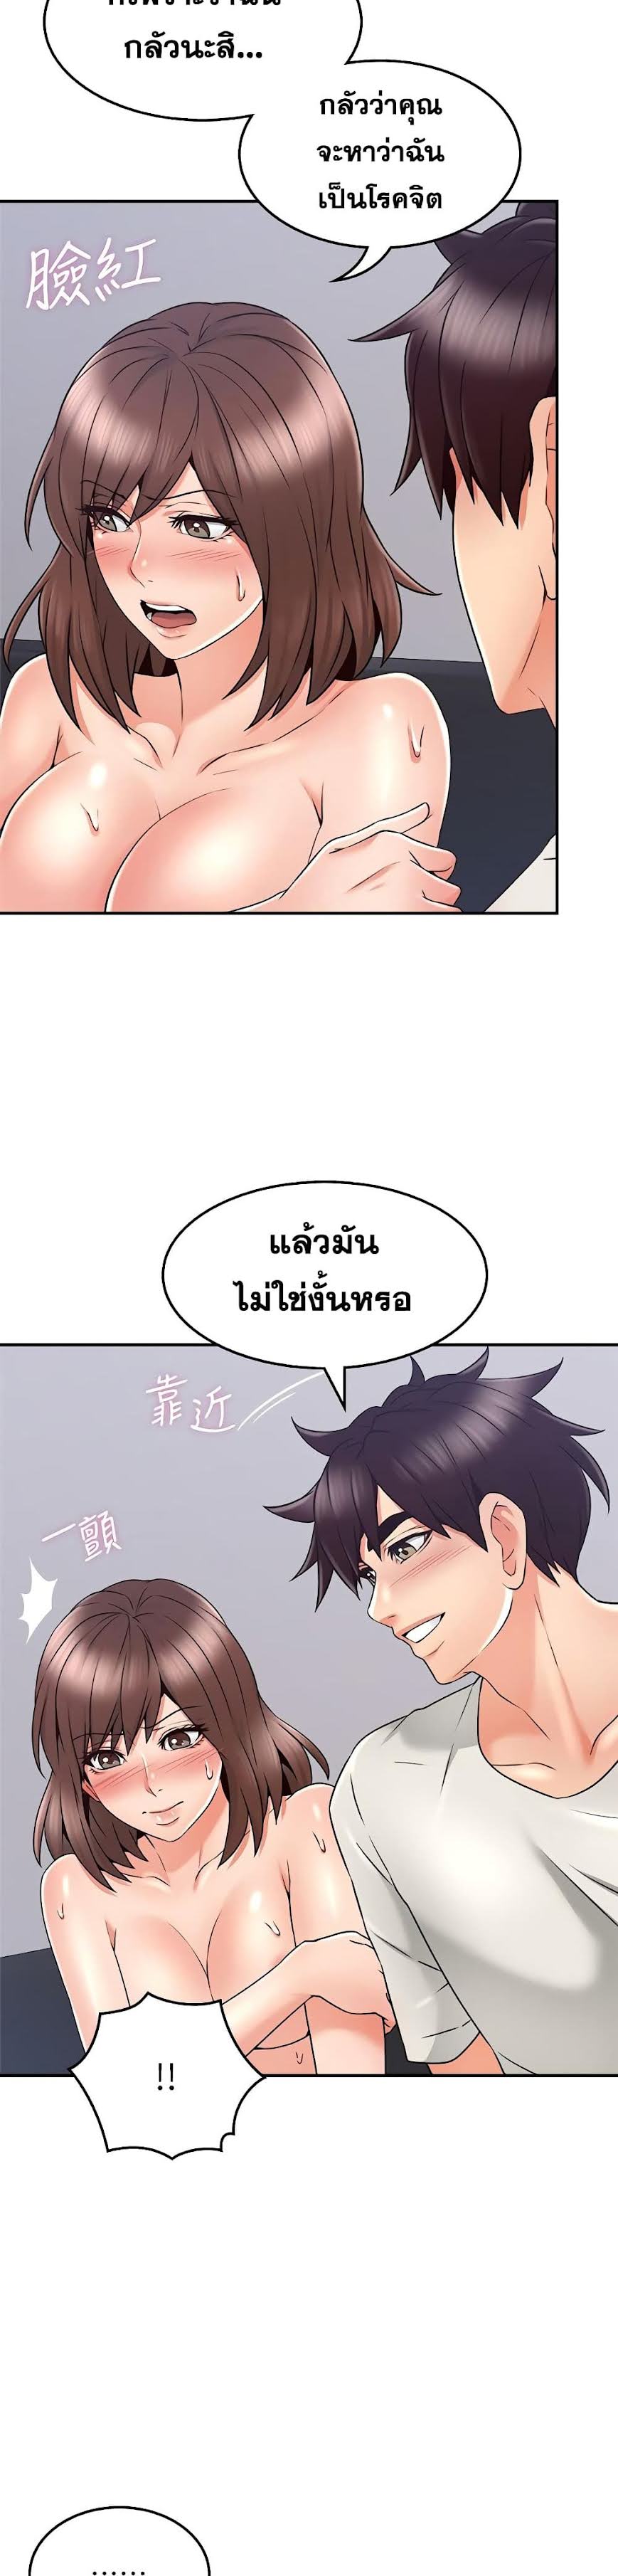 Soothe Me! - หน้า 18